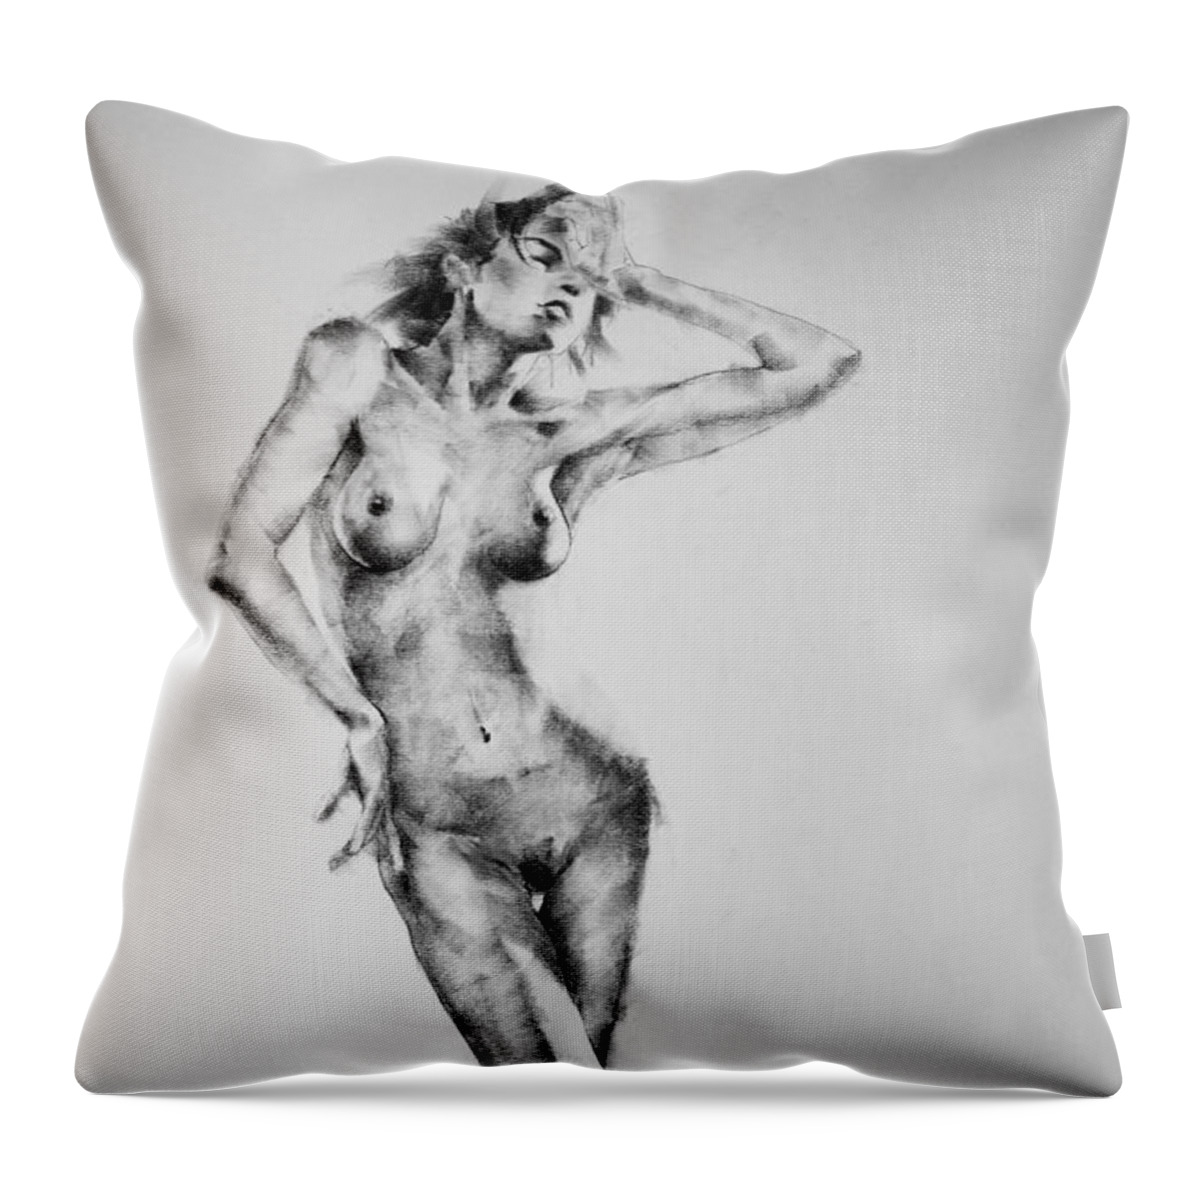 Erotic Throw Pillow featuring the drawing Page 10 by Dimitar Hristov